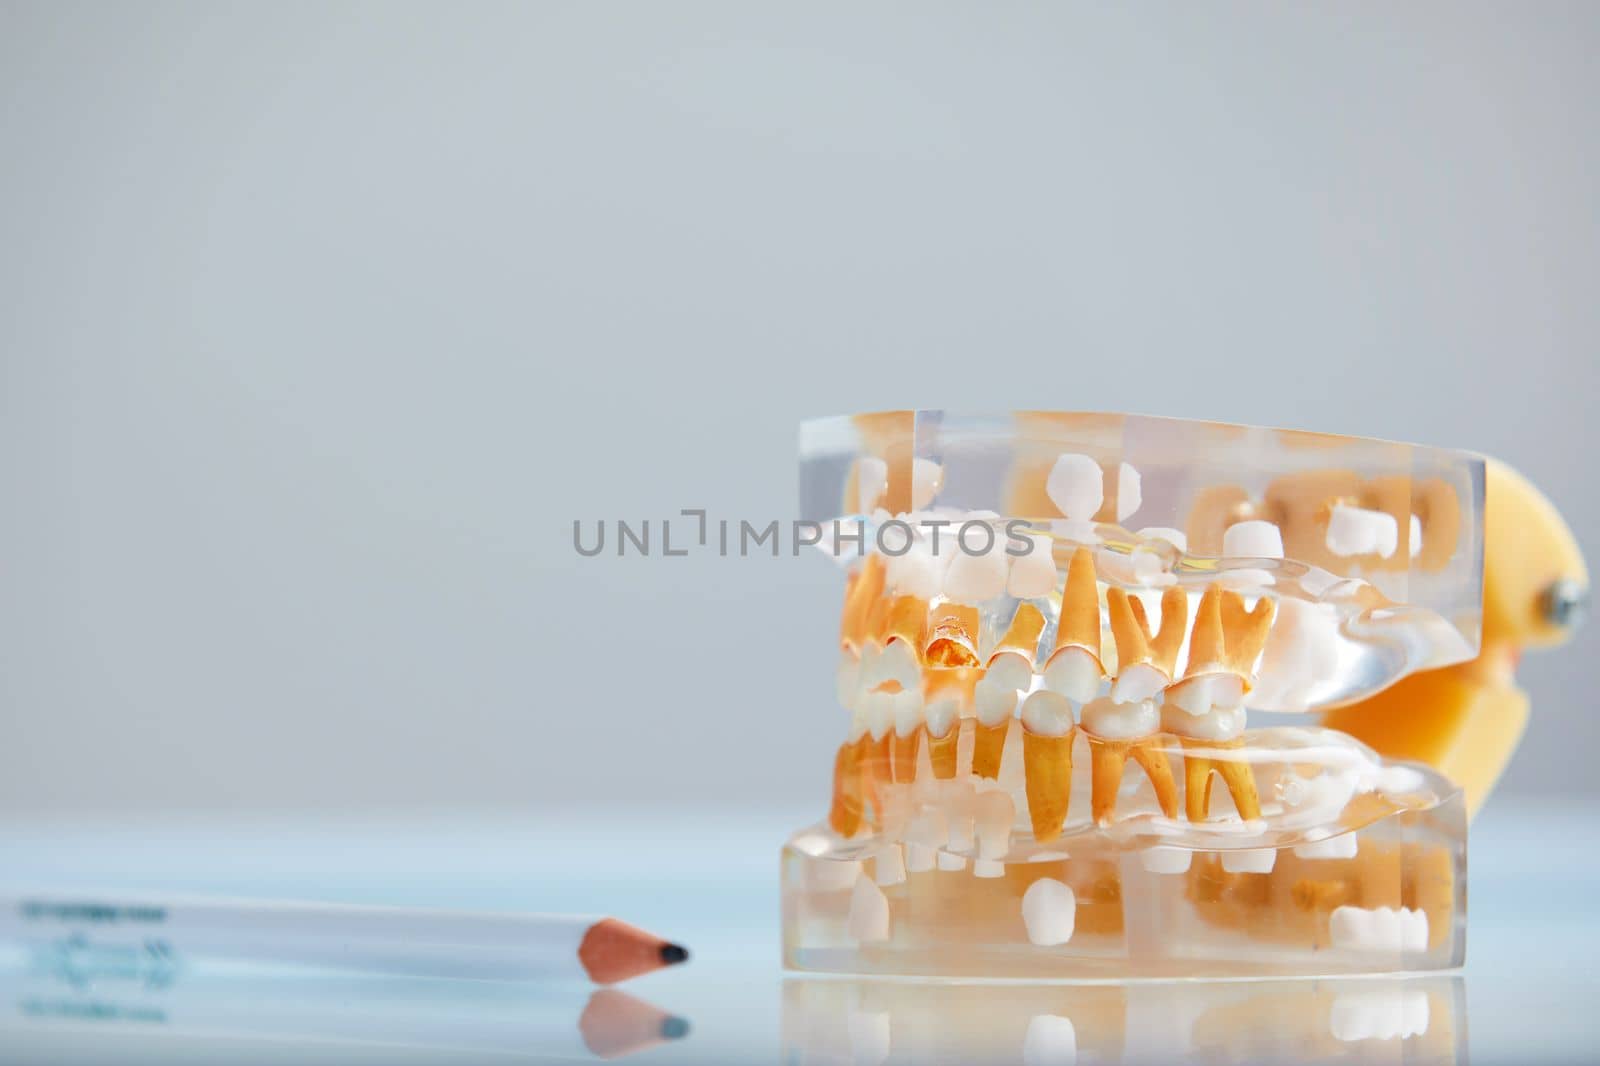 Dental teeth 3d transparent model of a real jaw